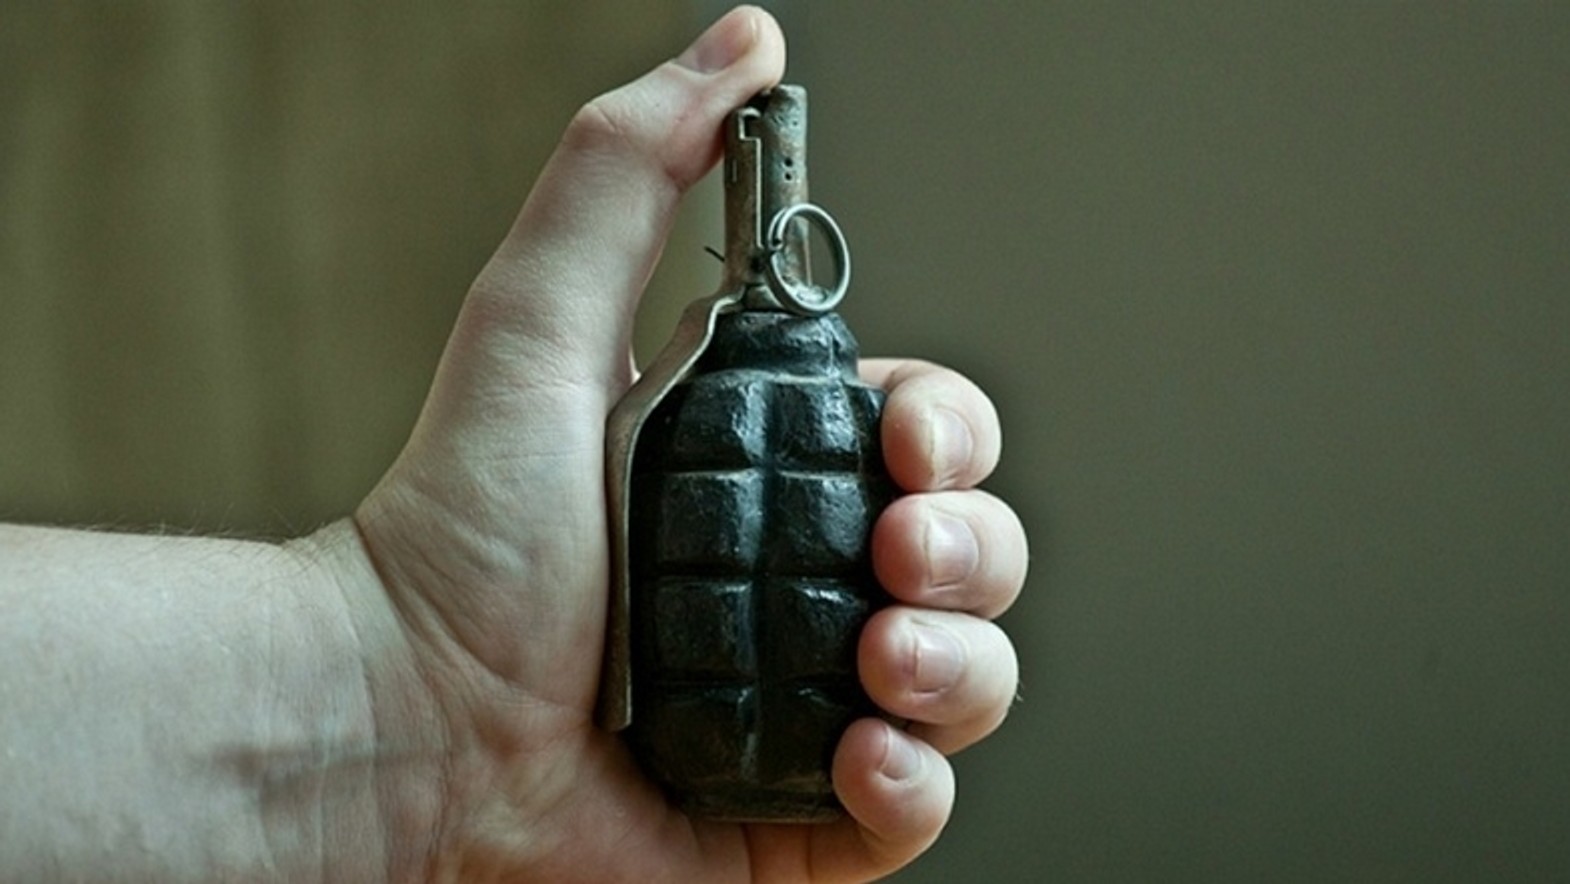 In The Yaroslavl Region The Head Of The Department Of In The Yaroslavl Region, The Head Of The Department Of The Federal Penitentiary Service Threw A Grenade At A Priest, The Head Of A Rural Settlement And A Local Resident